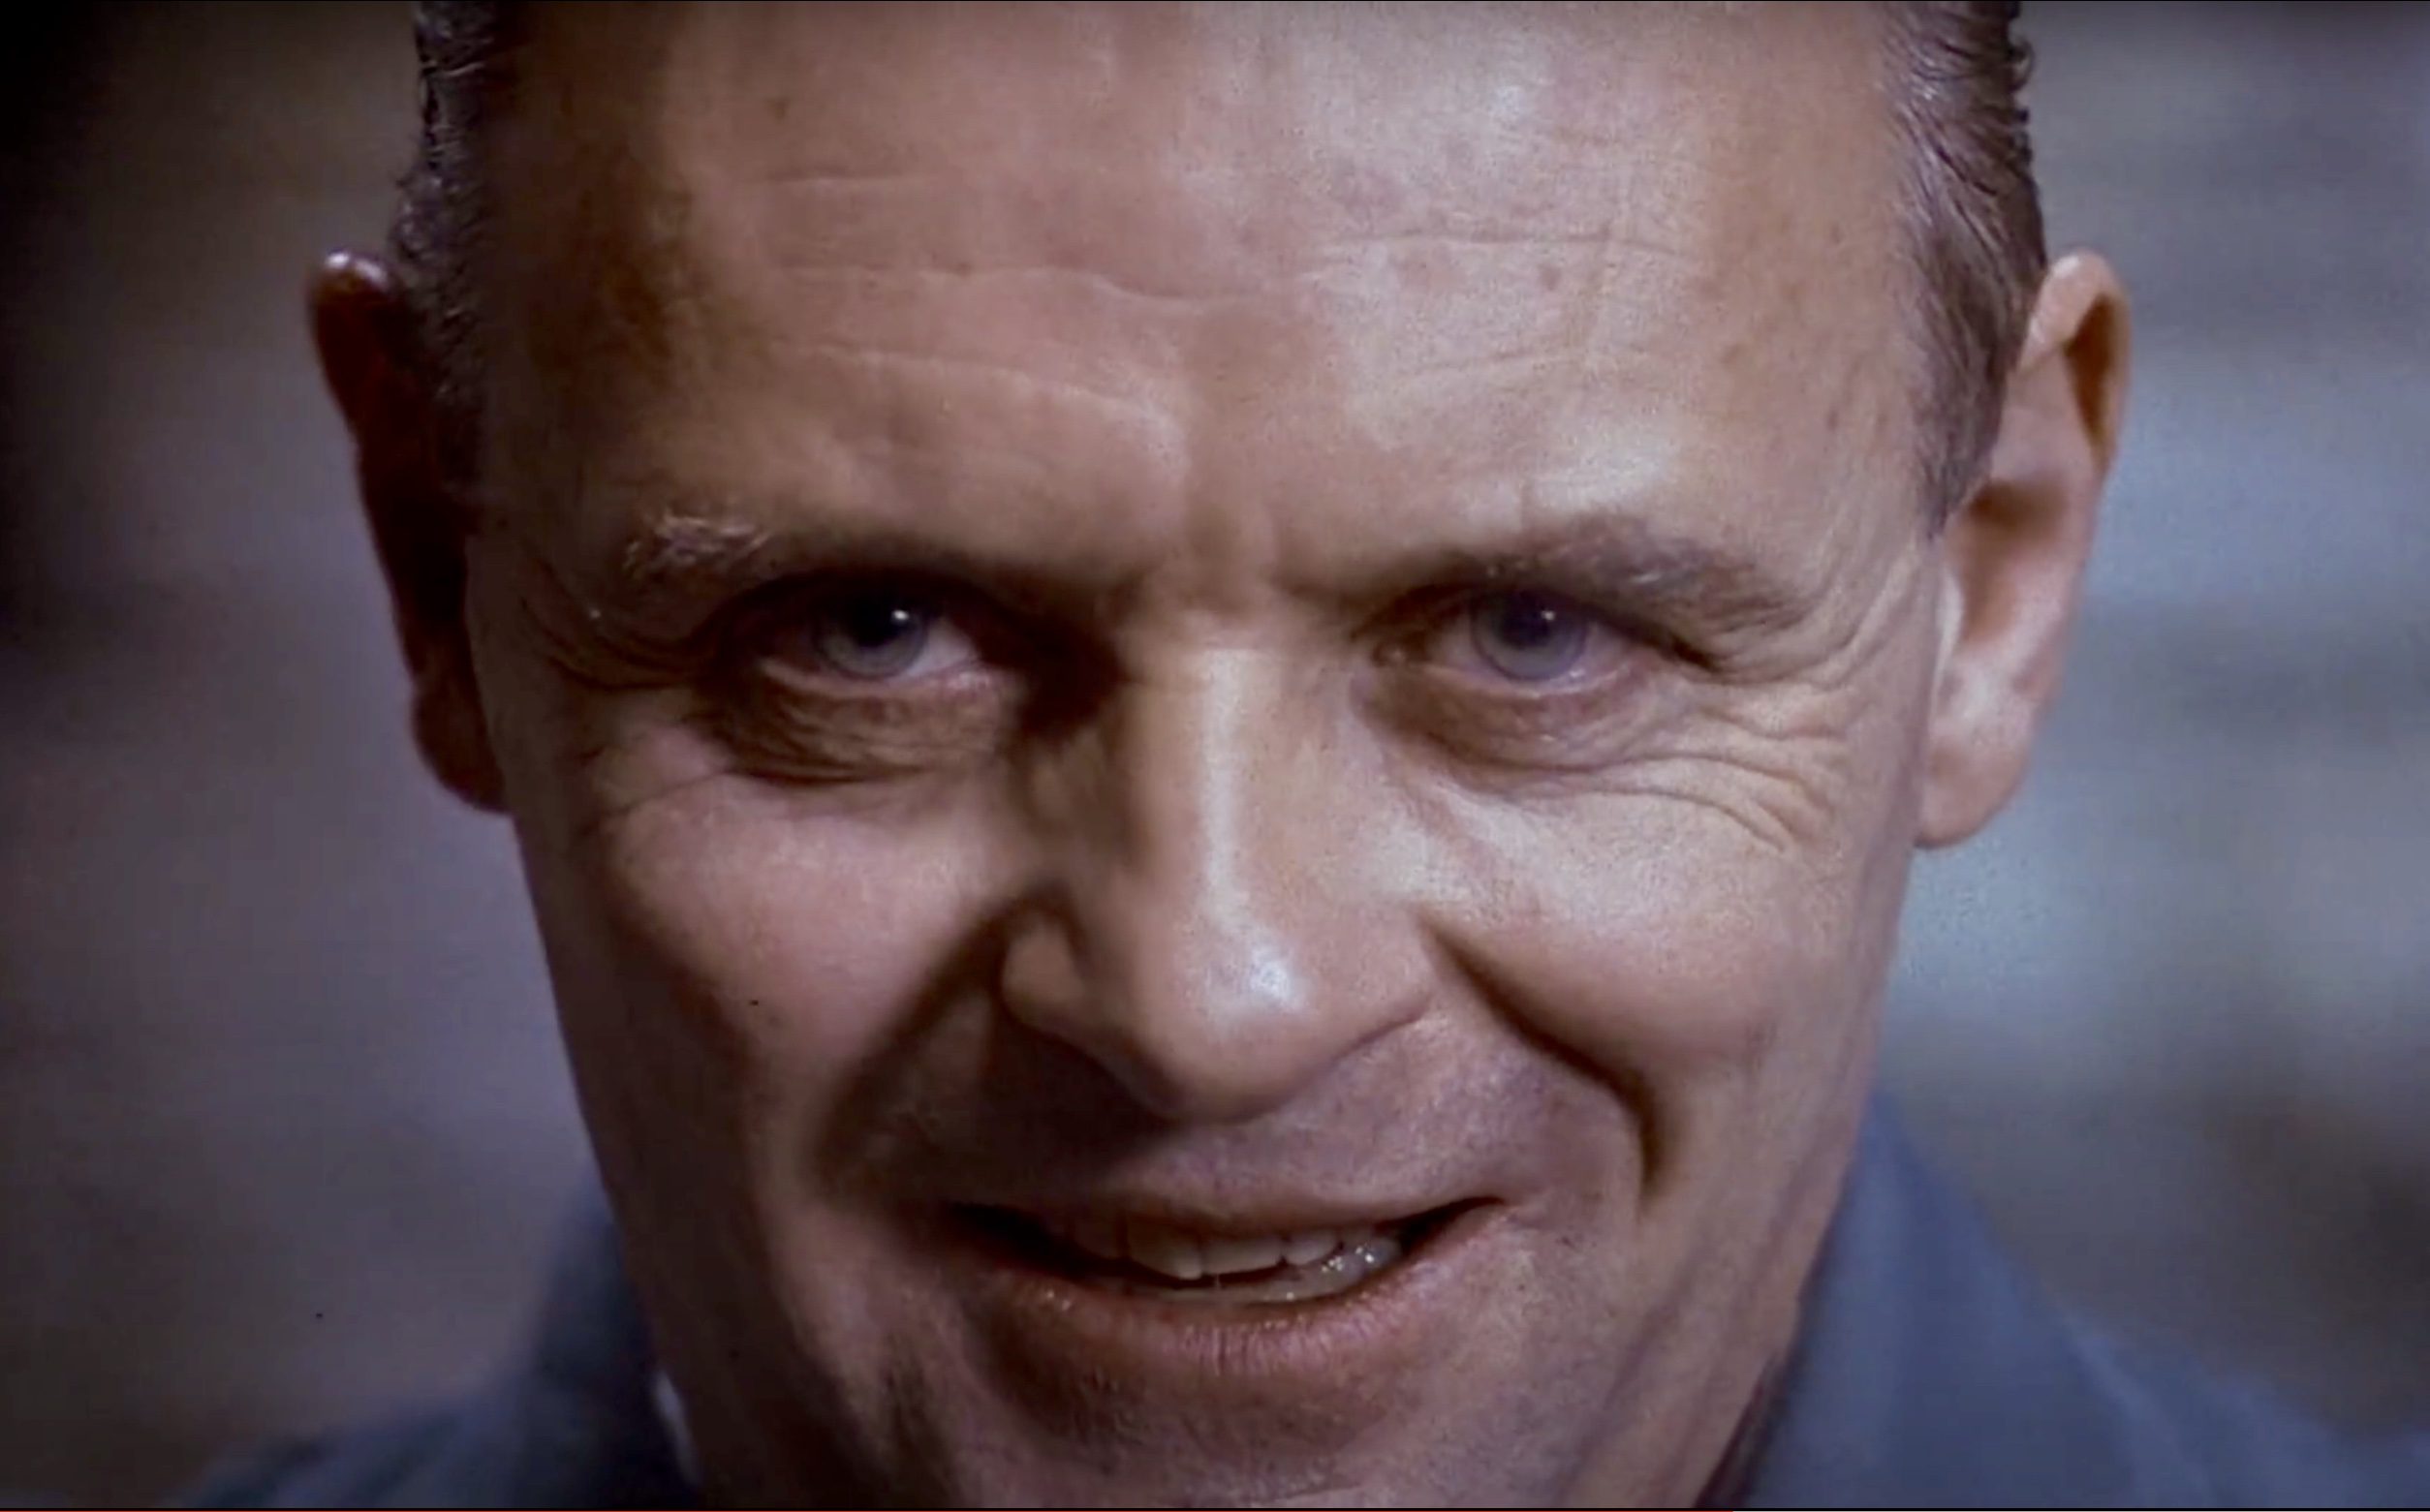 Treat Your Smartphone Like Hannibal Lecter